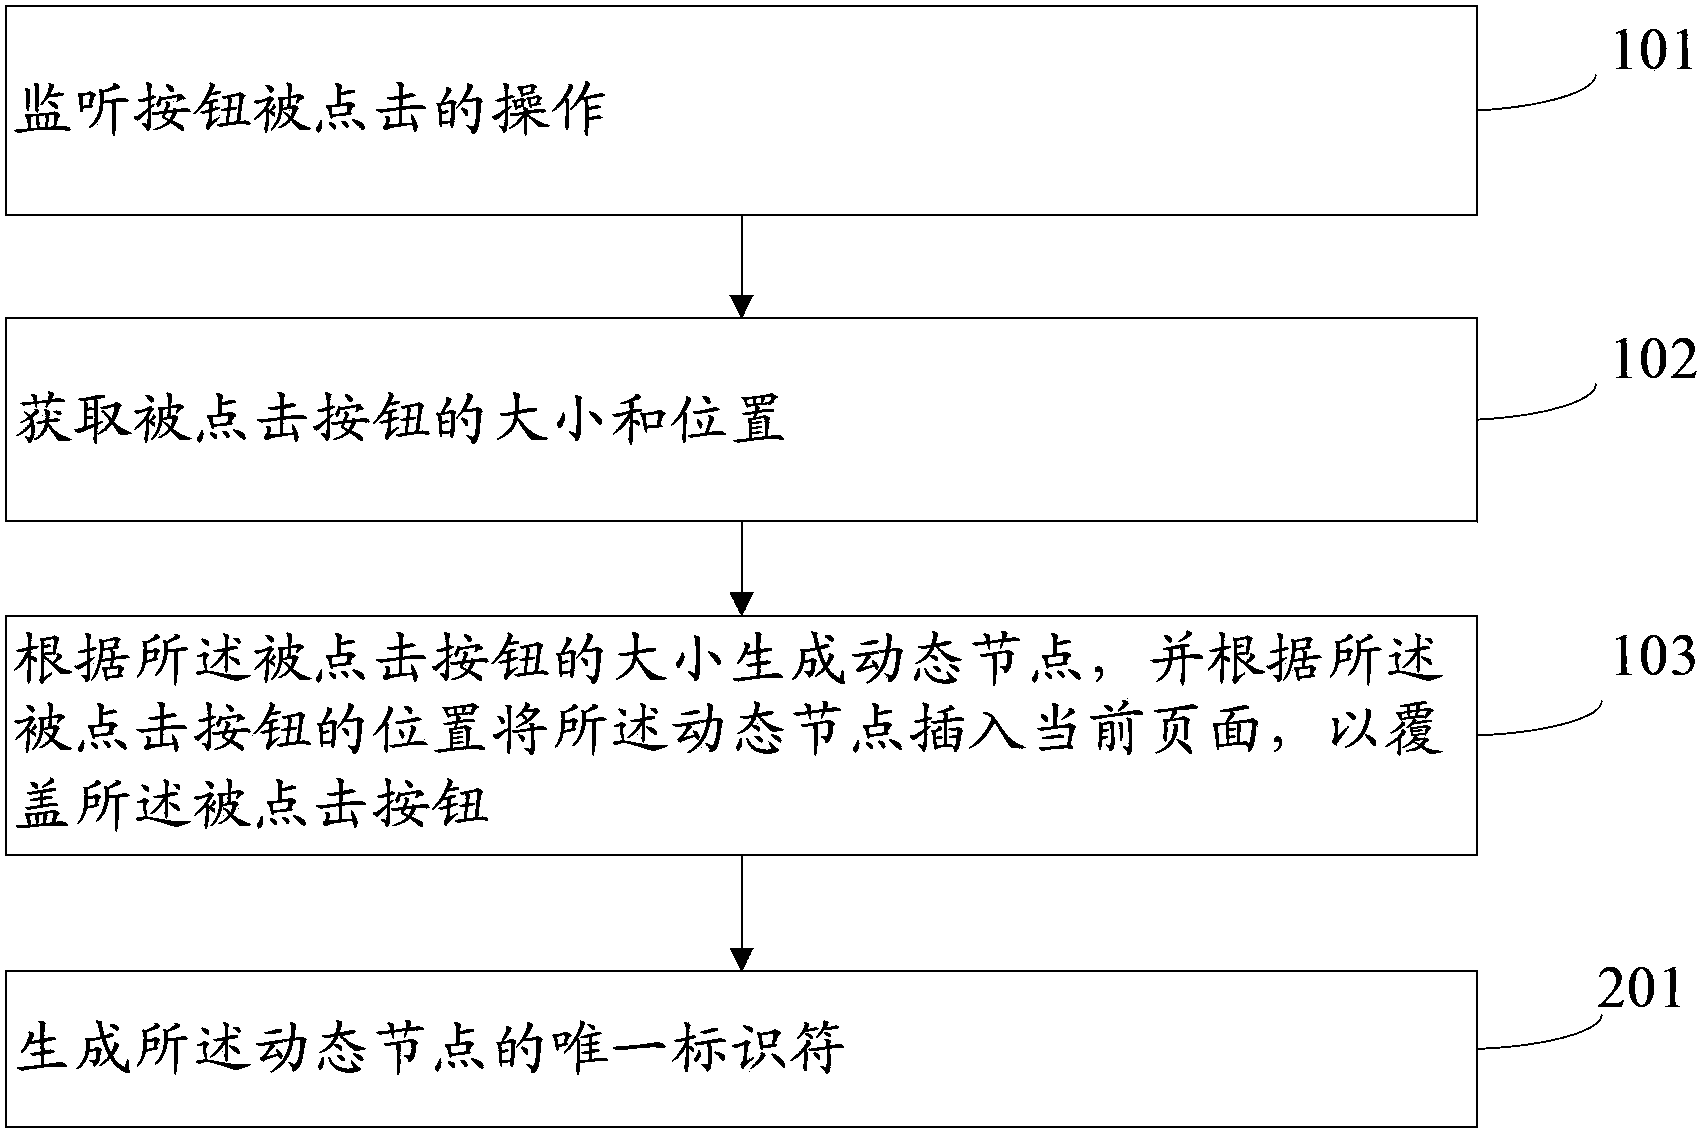 Method and system for preventing button from being clicked repeatedly and method and system for unlocking button